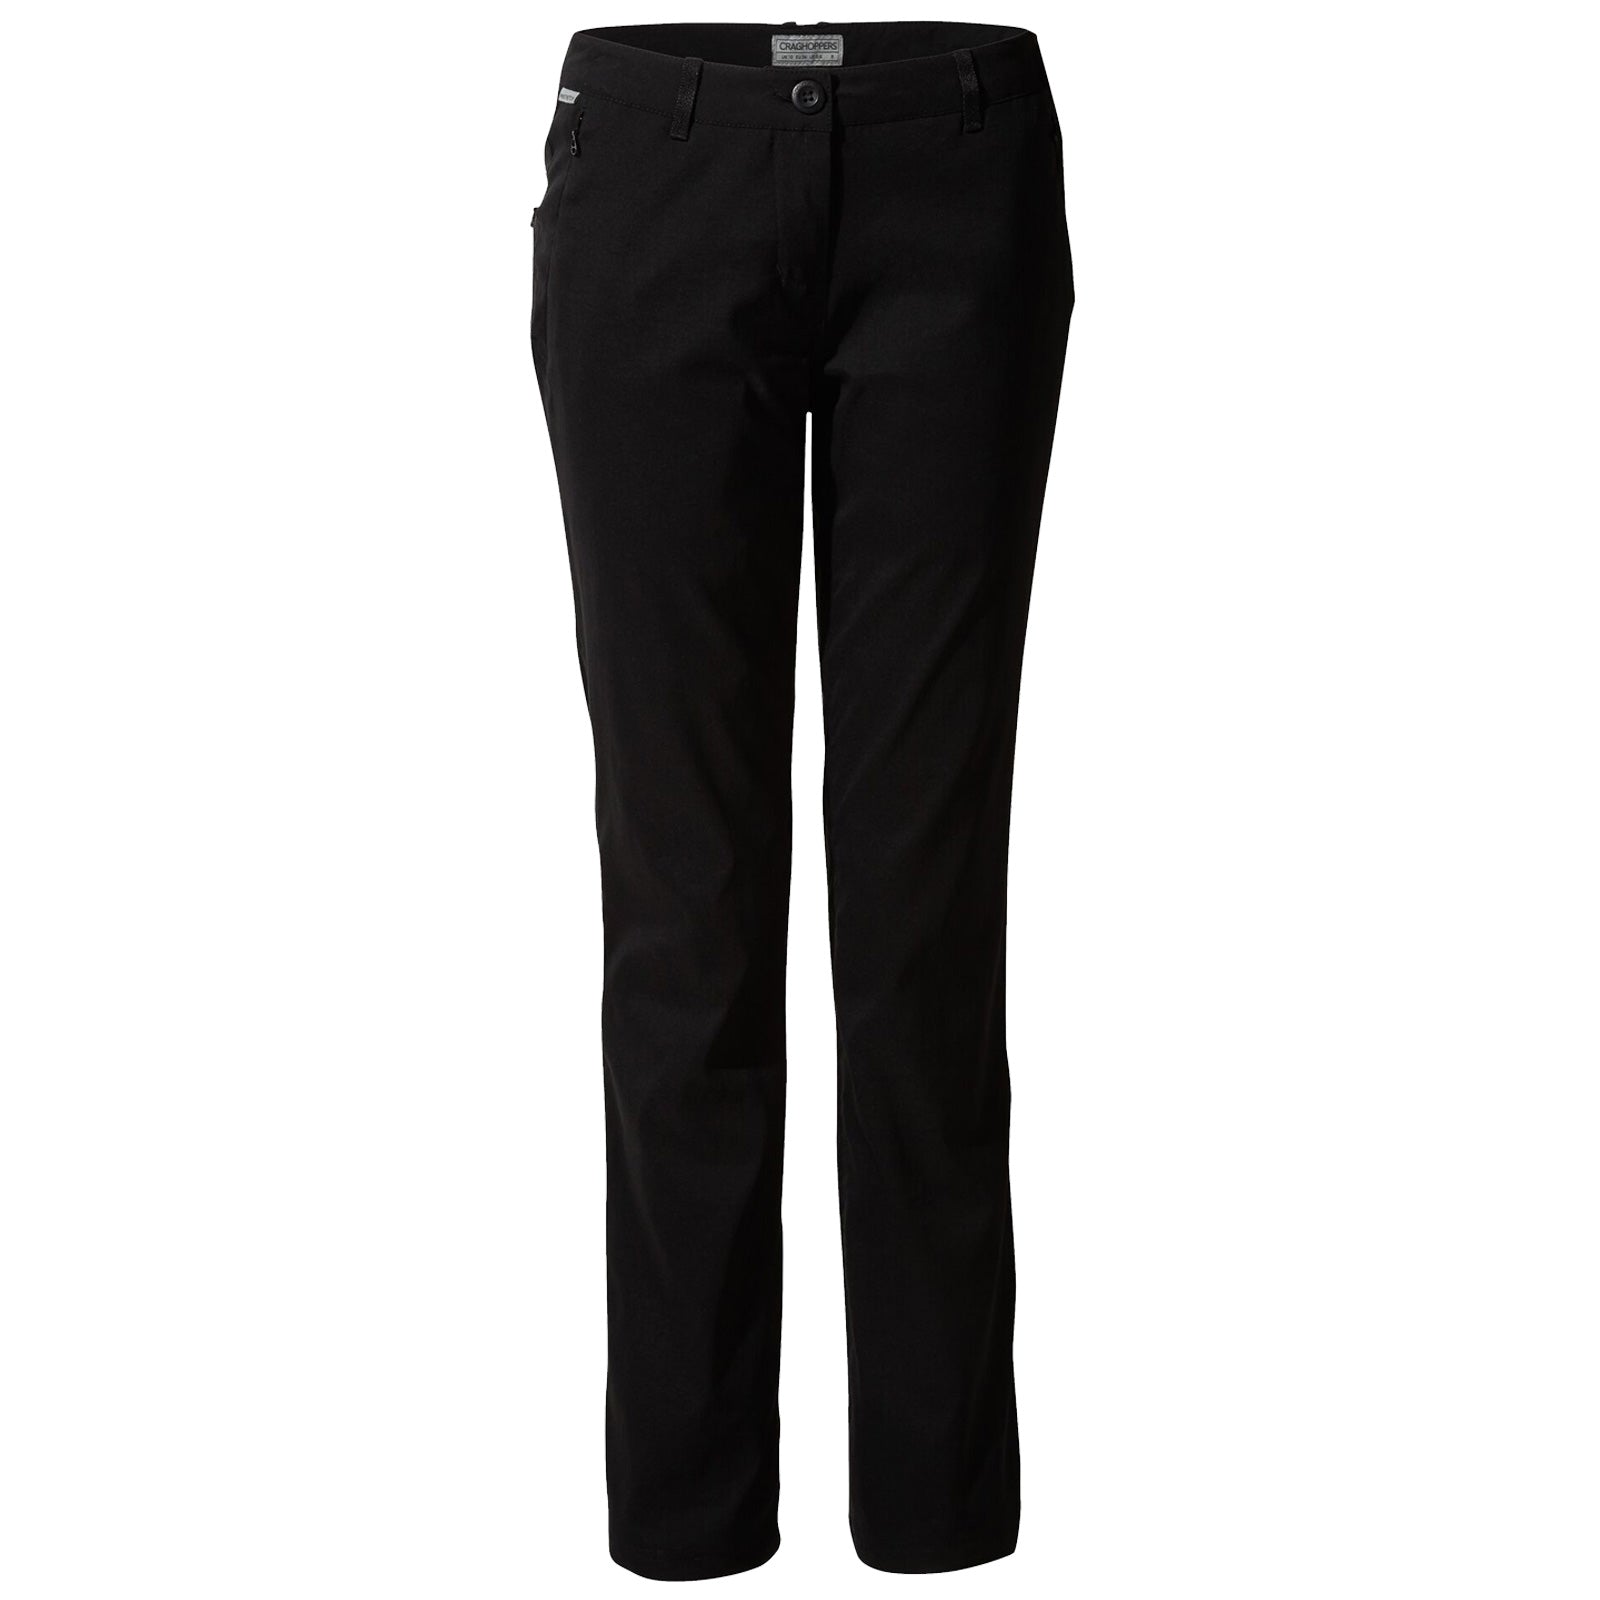 Craghoppers Ladies Kiwi Pro II Winter Lined Trousers